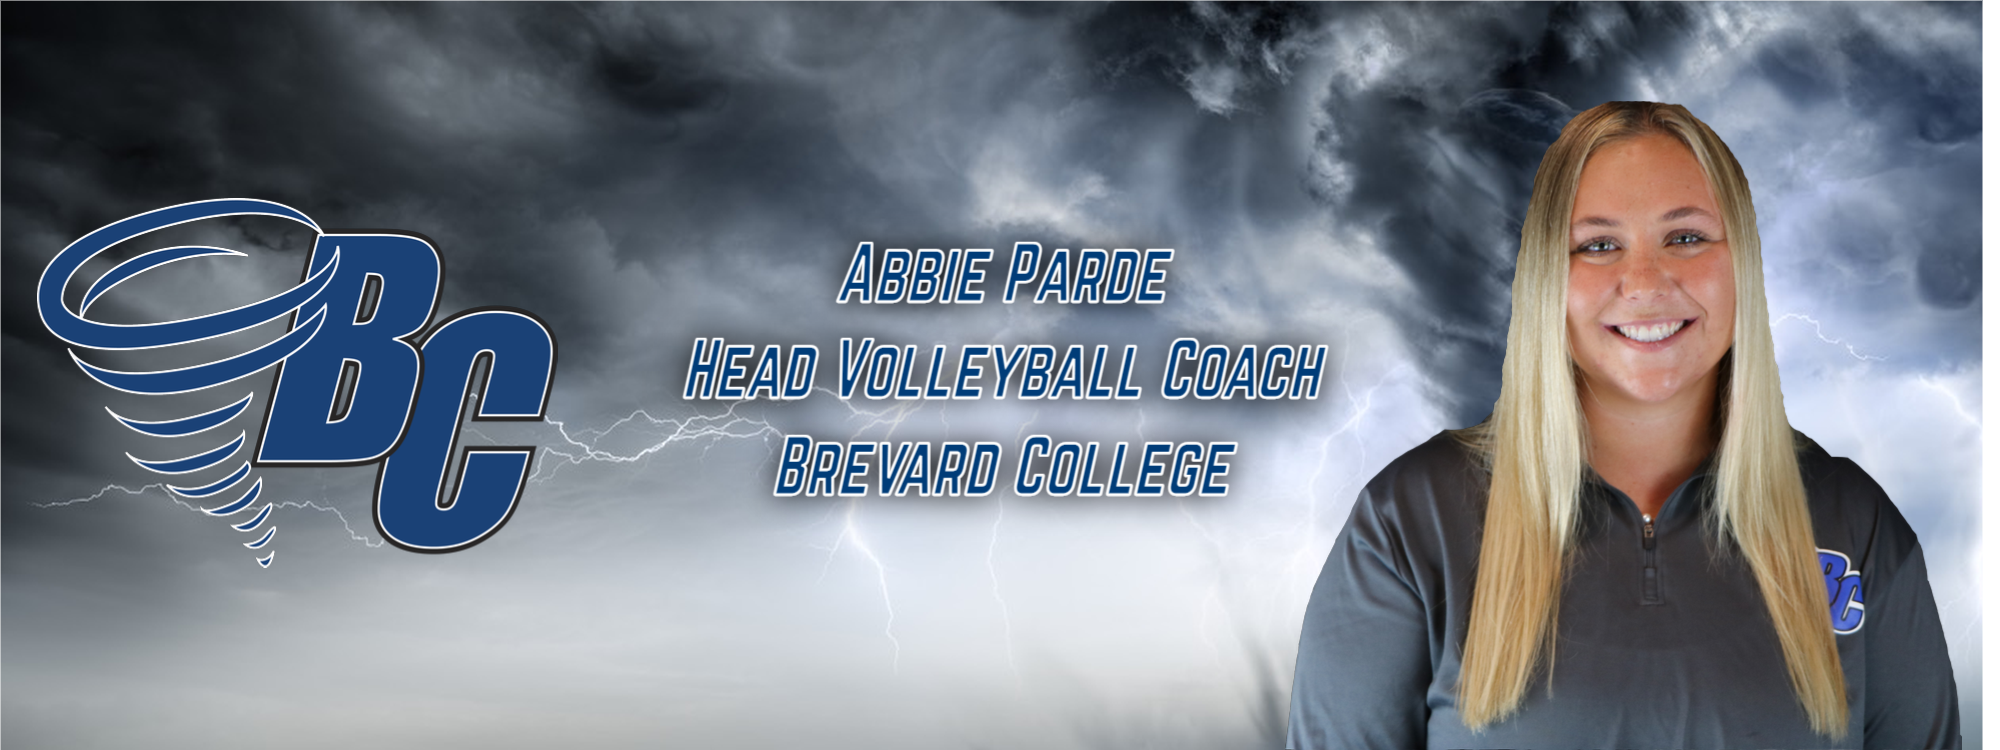 Abbie Parde Named Brevard College Head Volleyball Coach